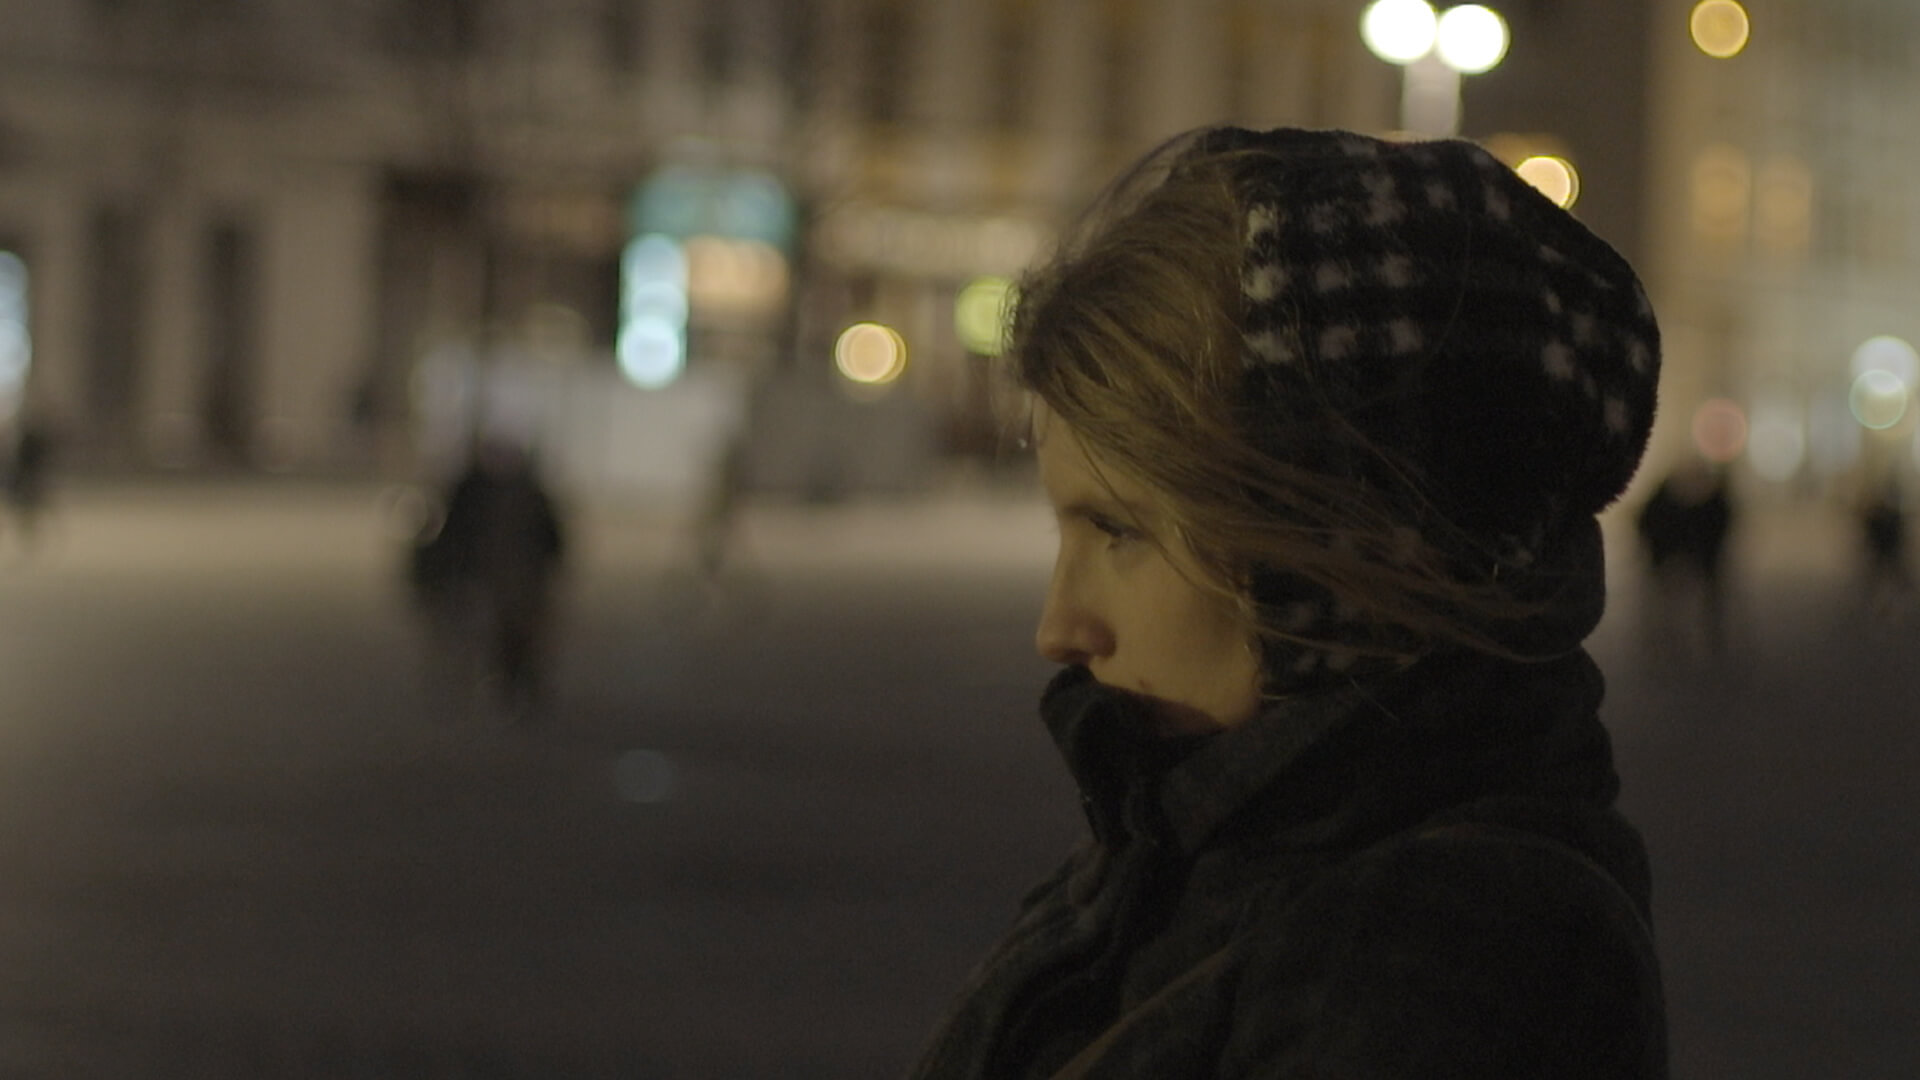 The profile of a woman from the shoulders up facing left, wearing a winter coat covering her mouth and head, standing in the street at night in front of blurry lights and buildings.